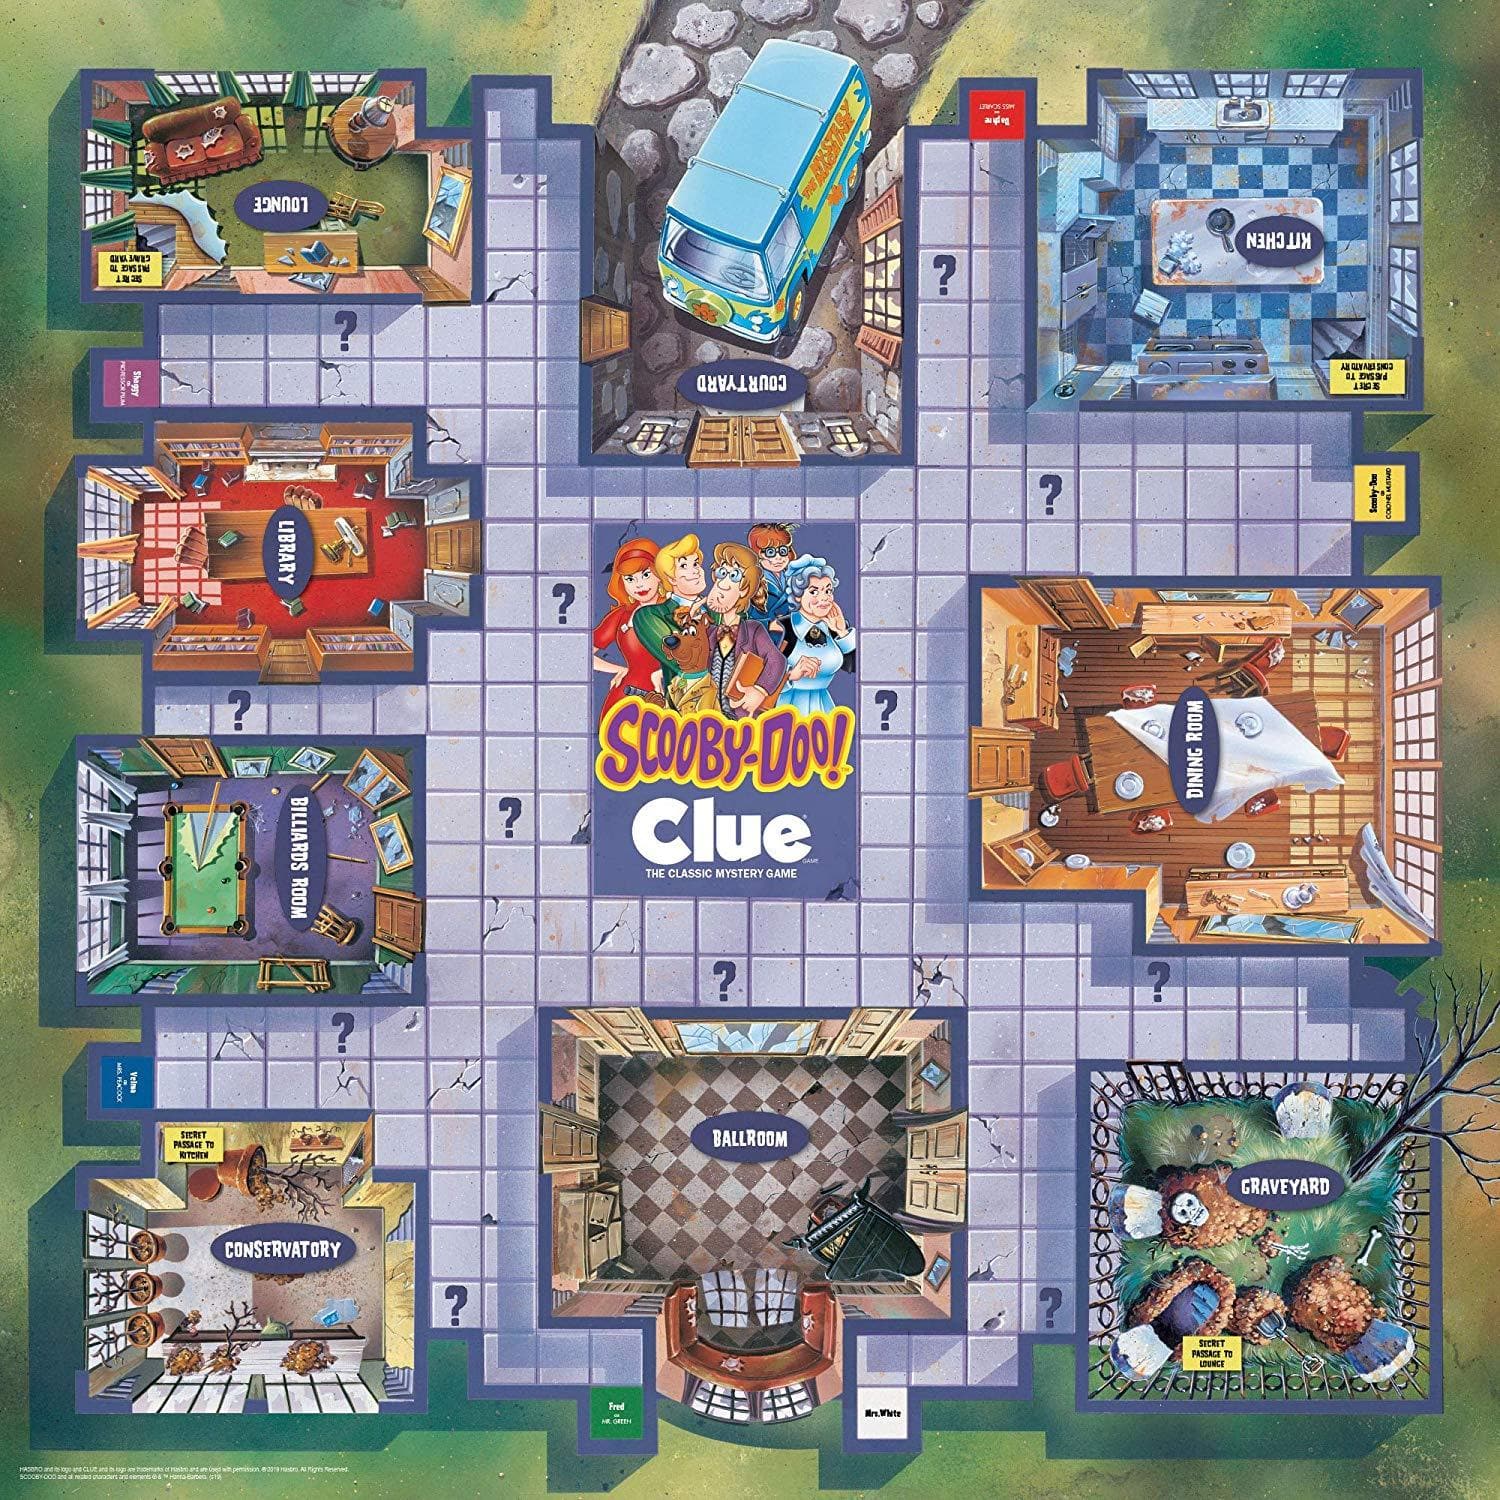 700304151858 Clue Scooby Doo game board image